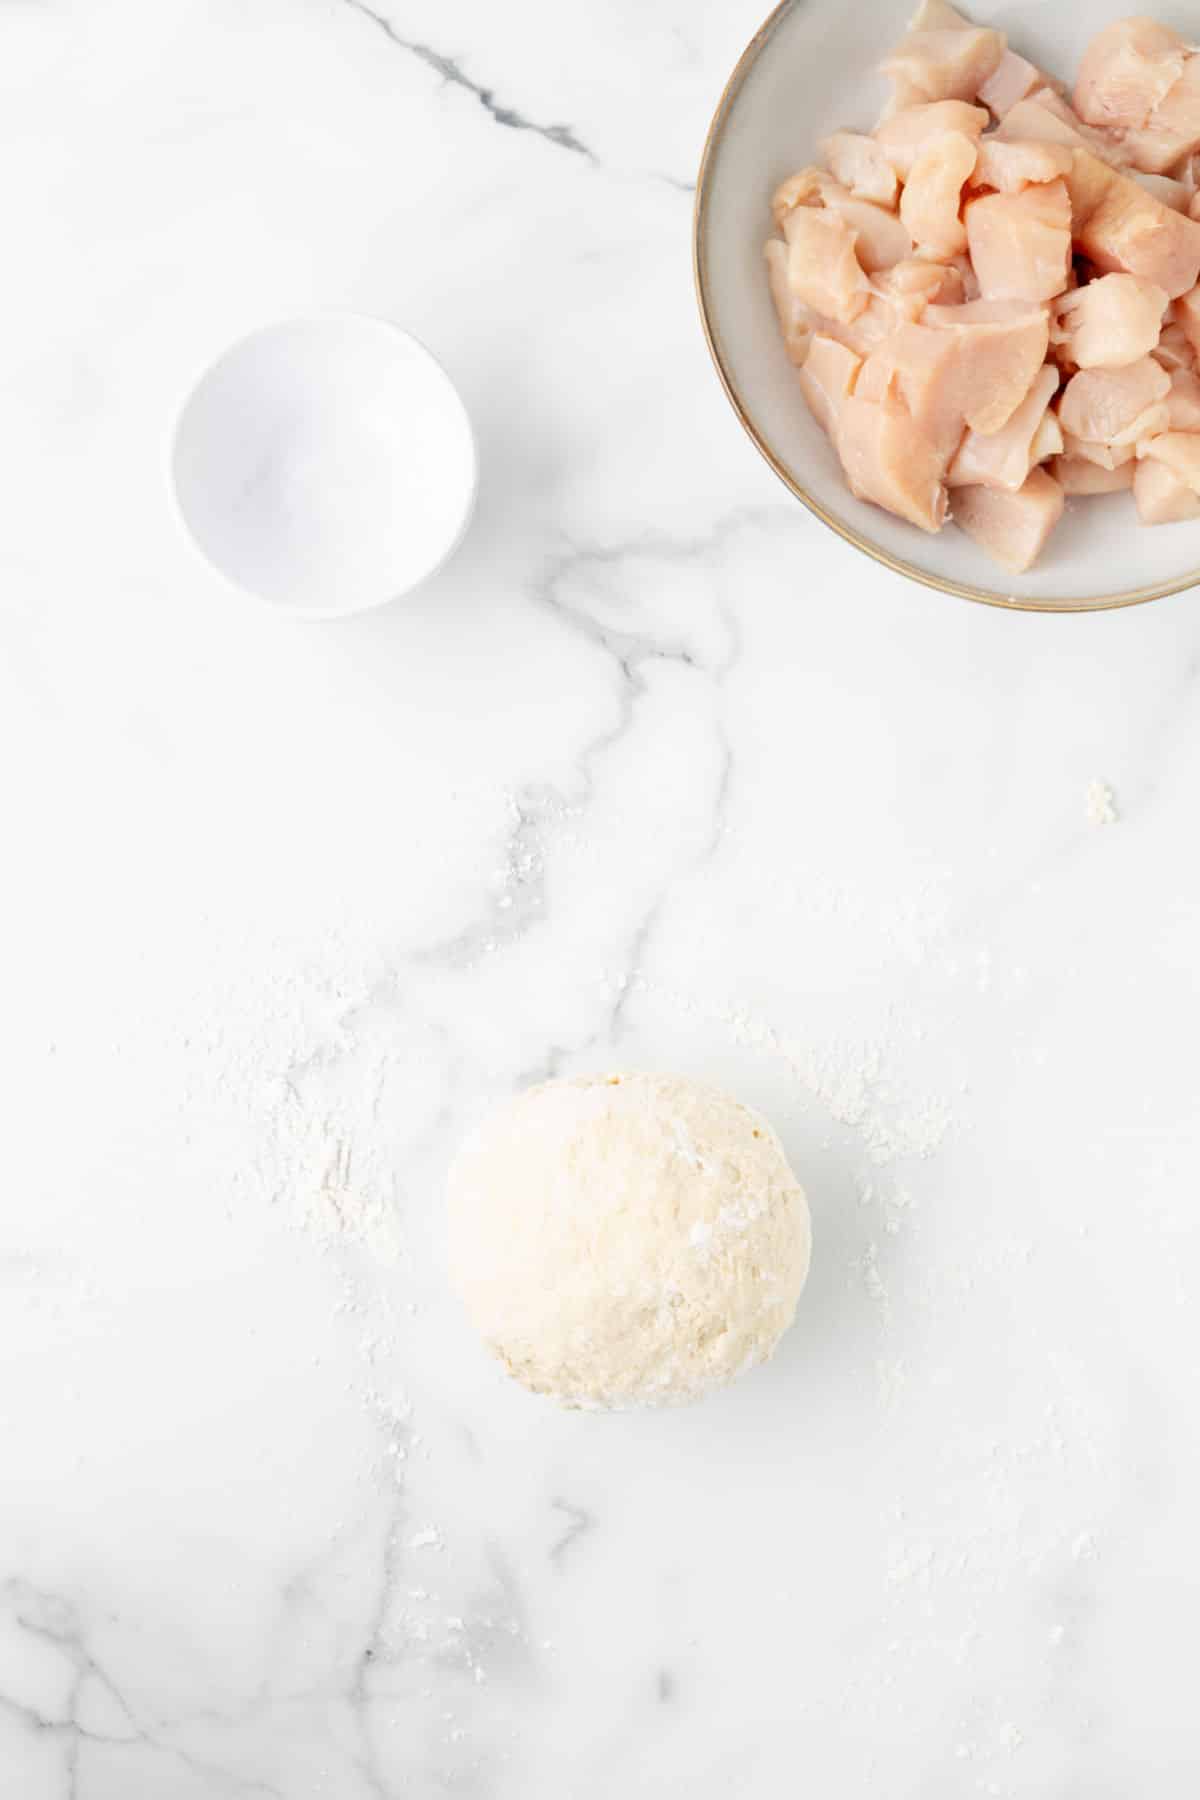 Kneaded dough on a marble background.